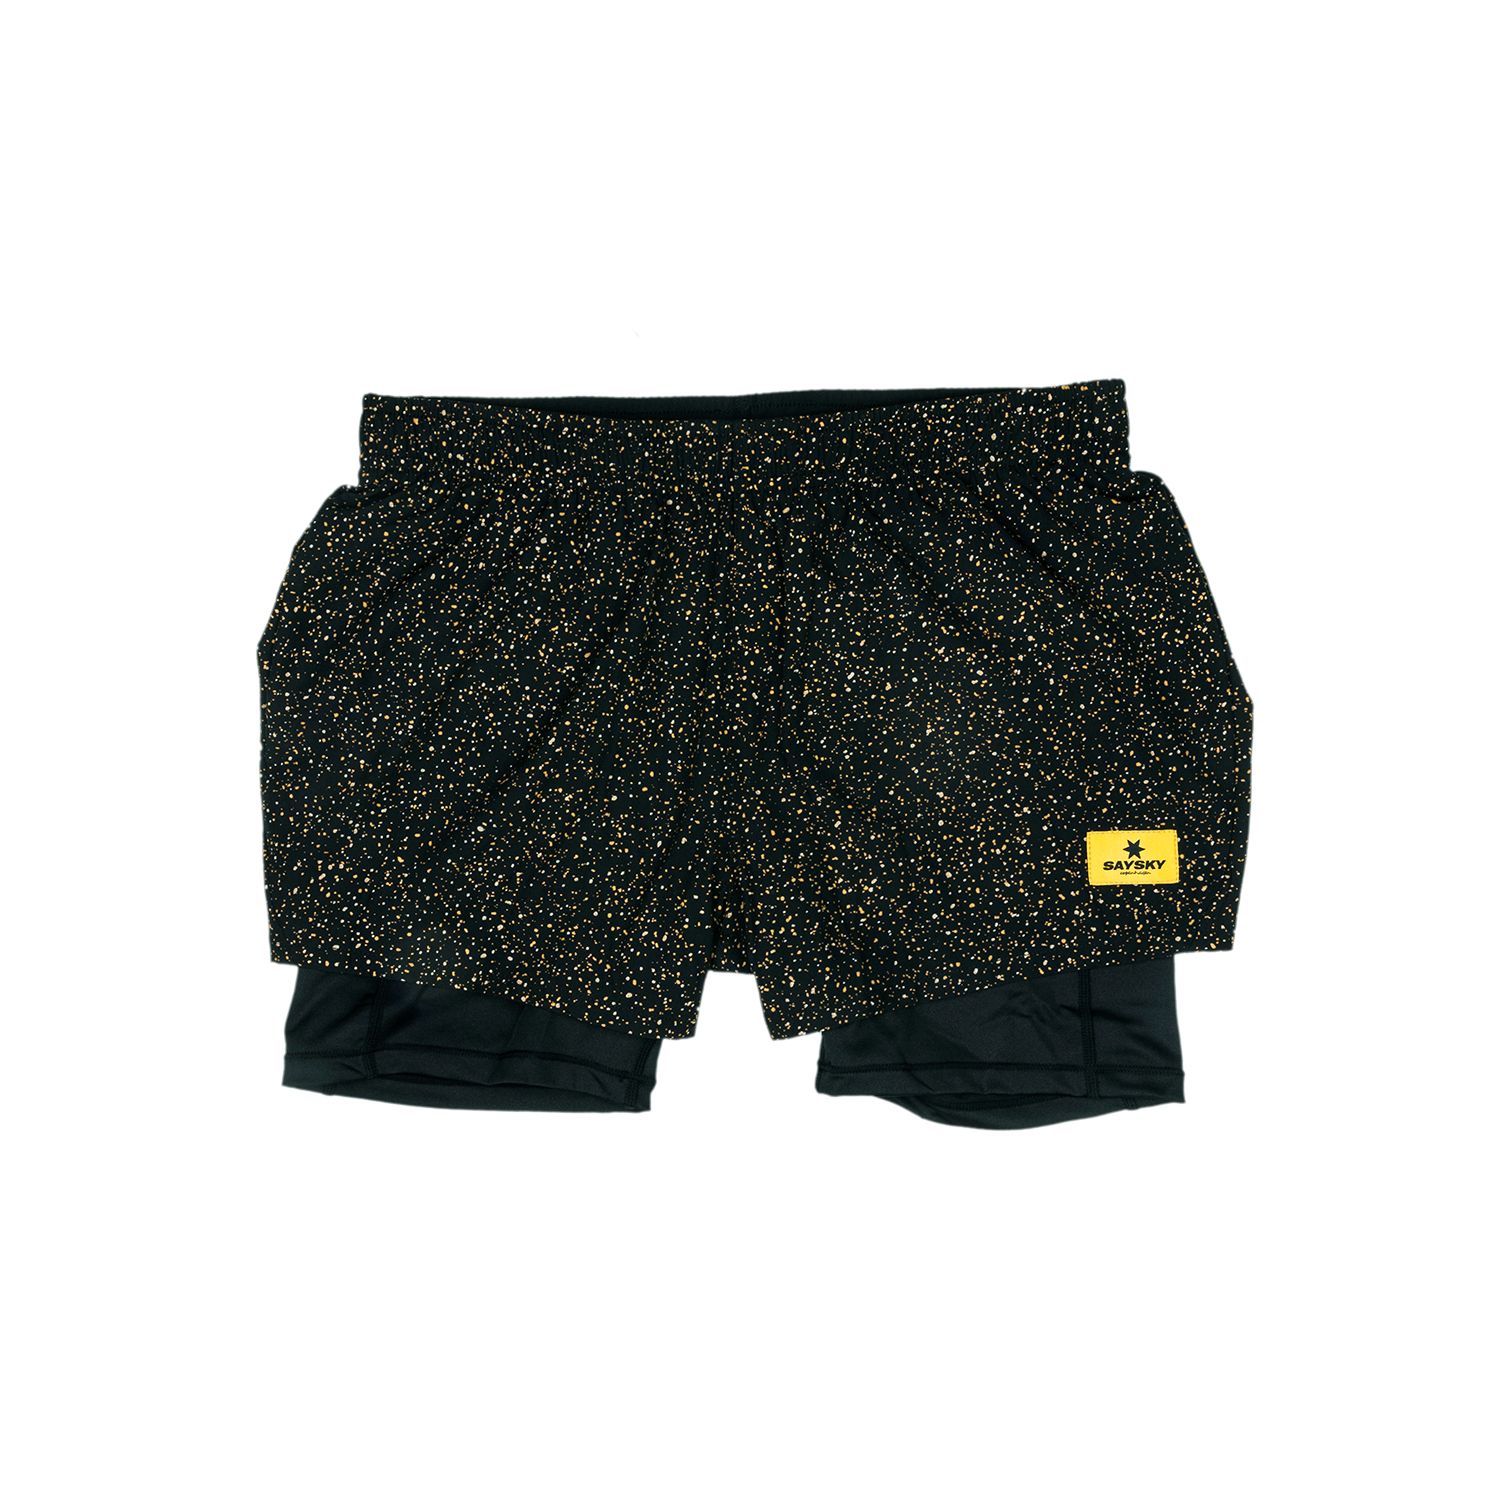 SAYSKY Universe 2 in 1 Shorts Dame | LØBEREN